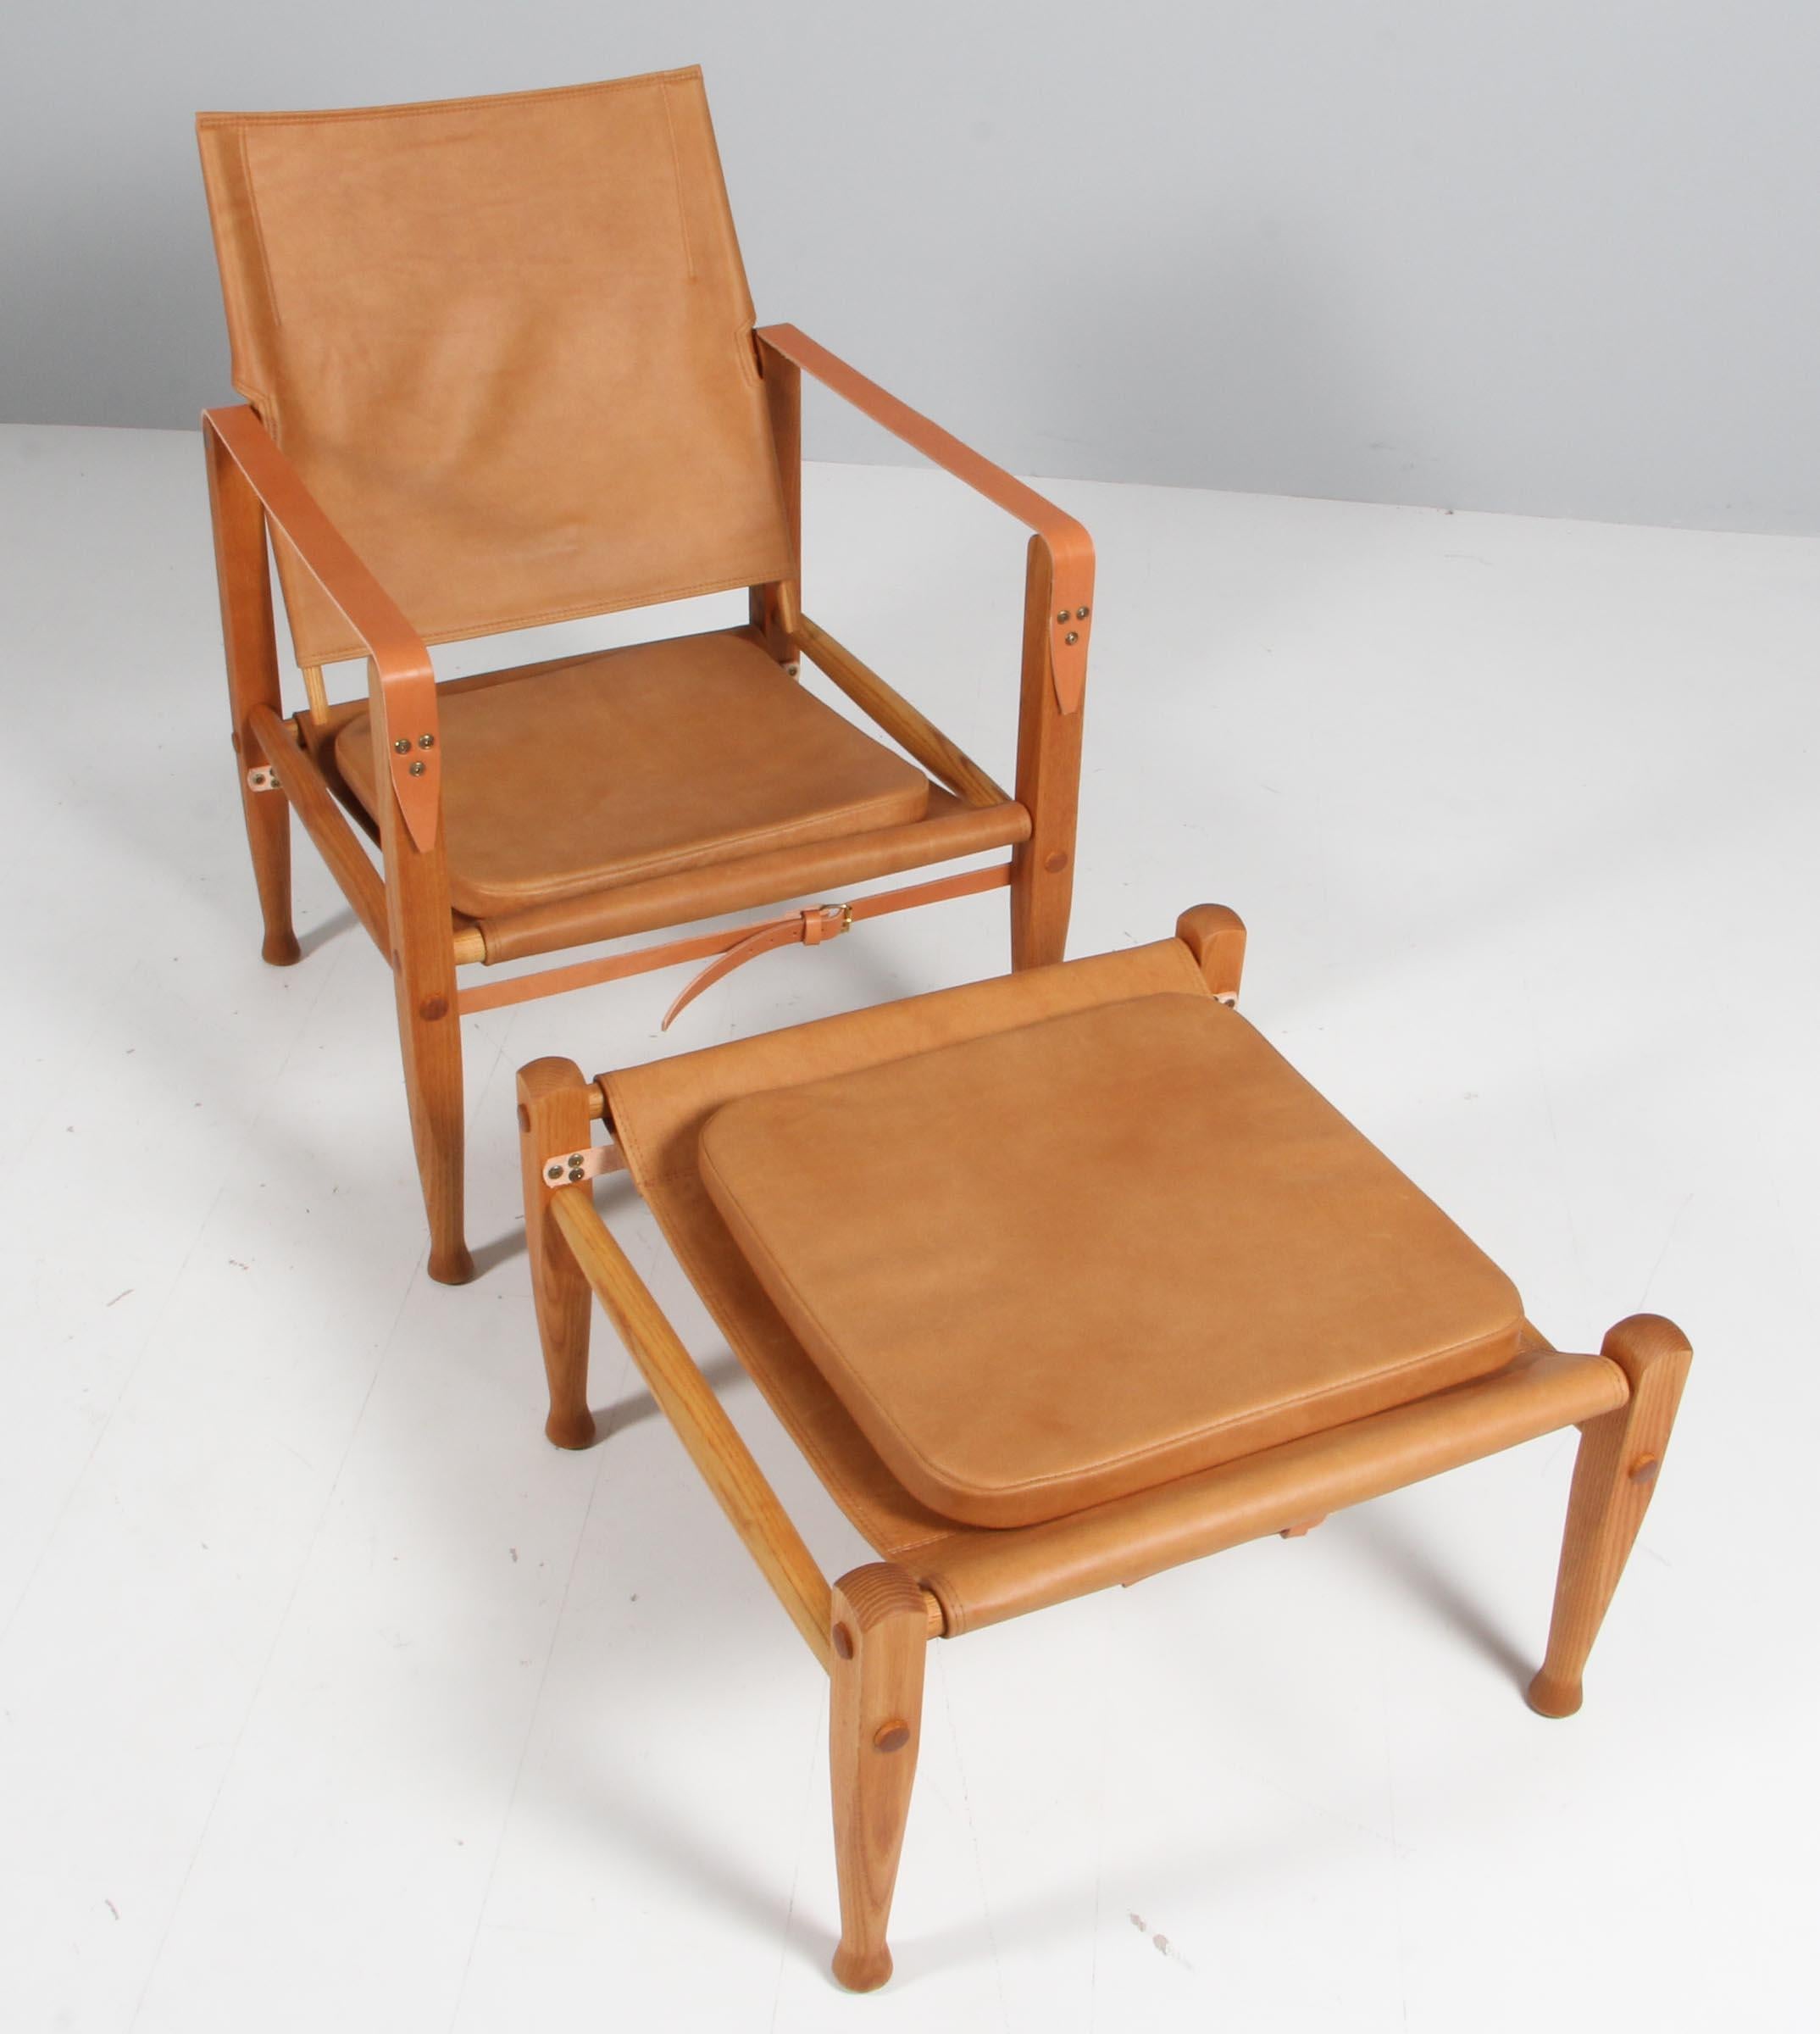 Kaare Klint for Rud Rasmussen. Safari chair new upholstered with Vintage aniline leather. With ottoman.

Frame in solid ash.

Model Safari chair, made by Rud Rasmussen.